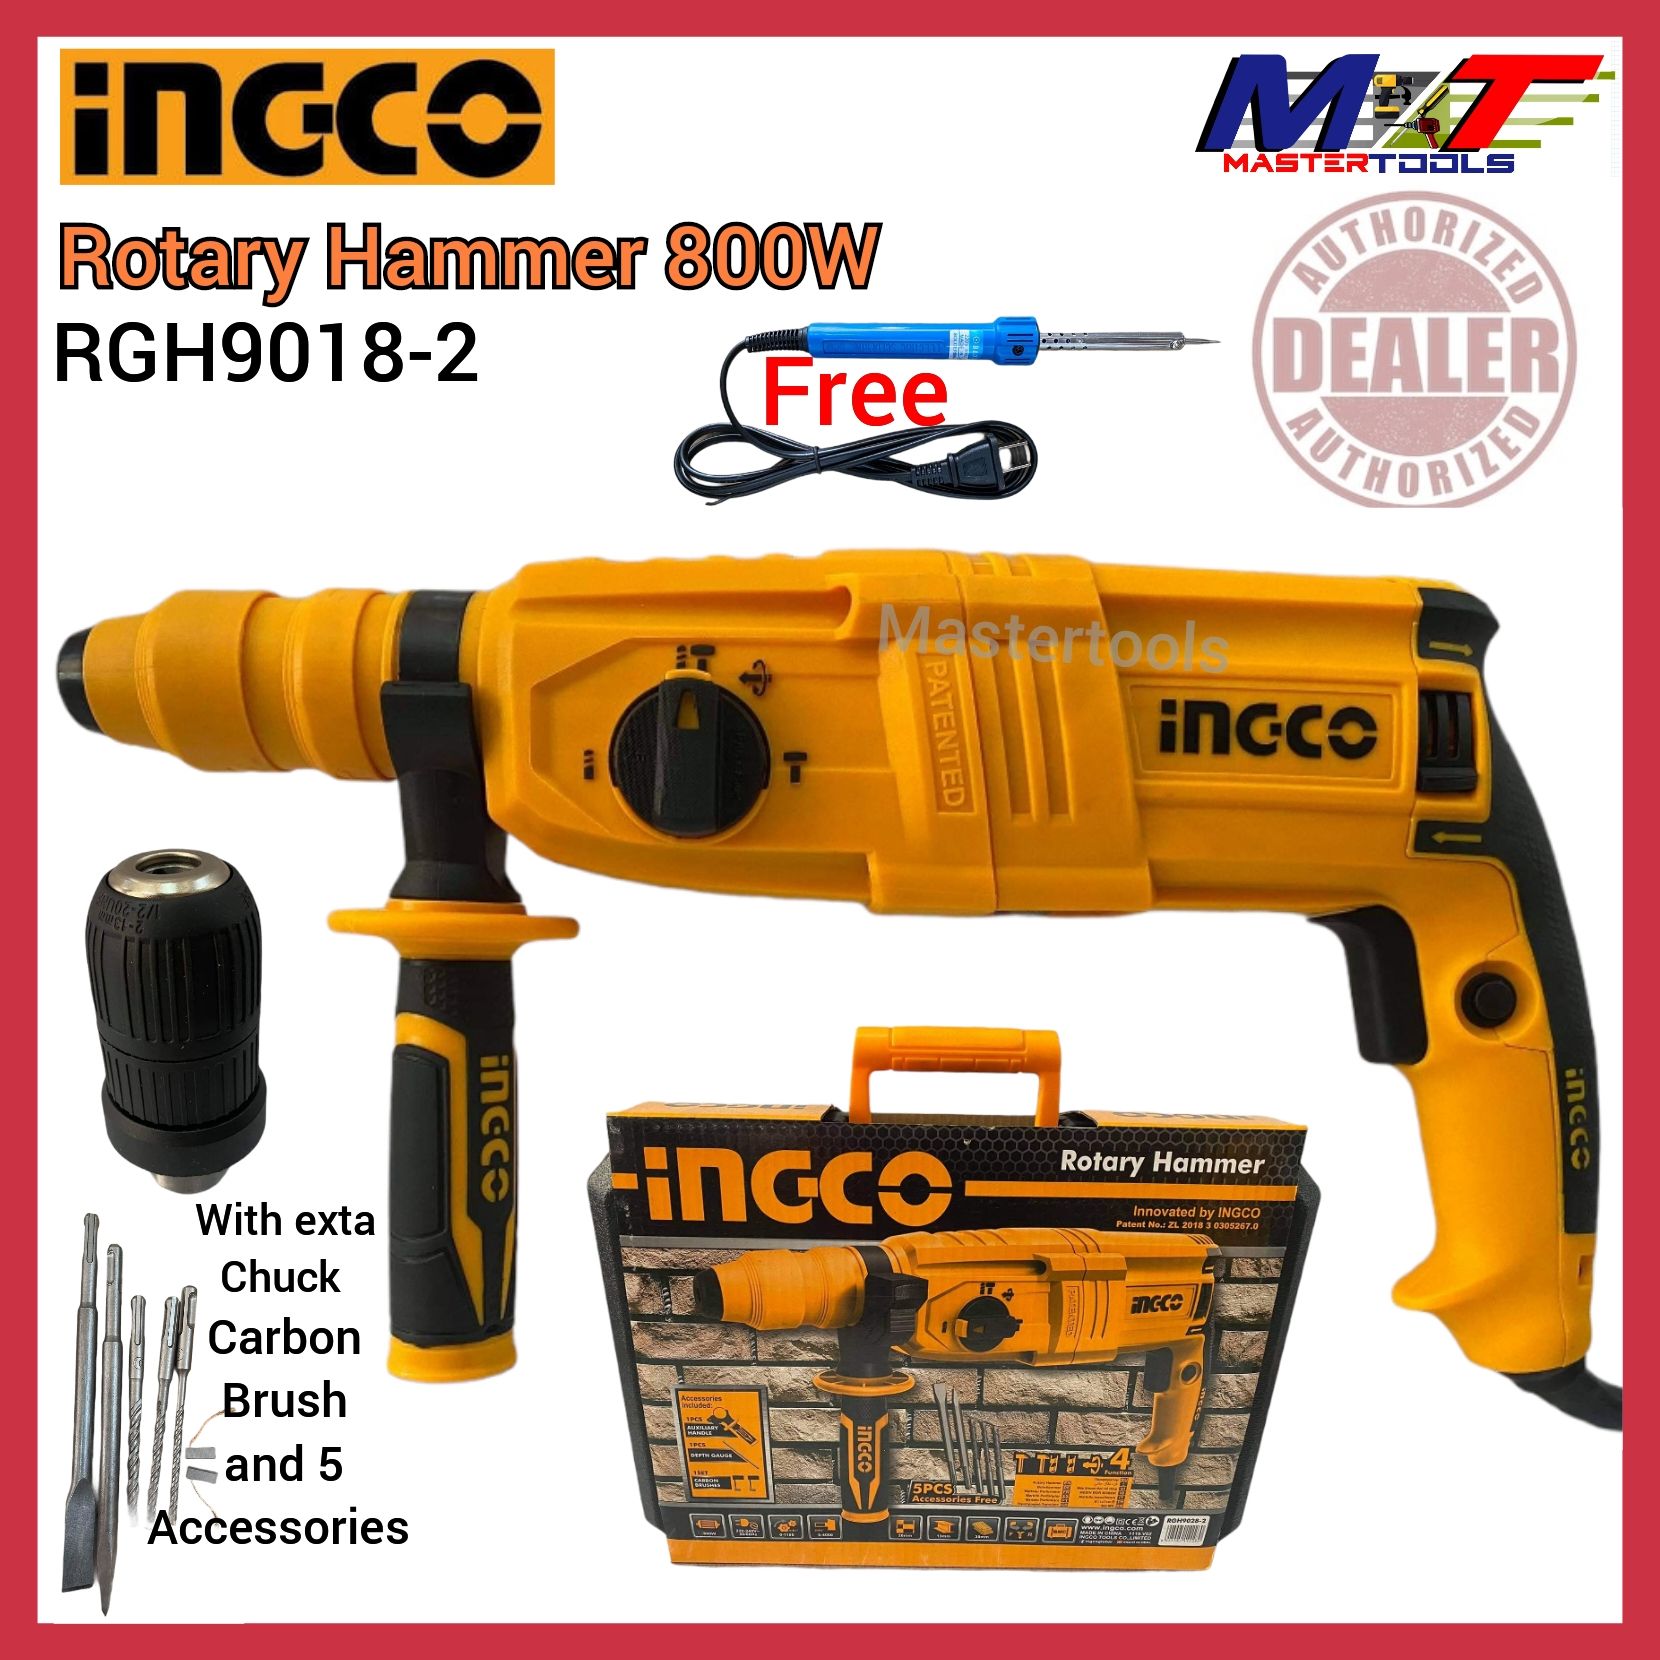 Ingco Rotary Hammer 800W SDS PLUS RGH9028-2 previously RGH9018-2 (FREE ...